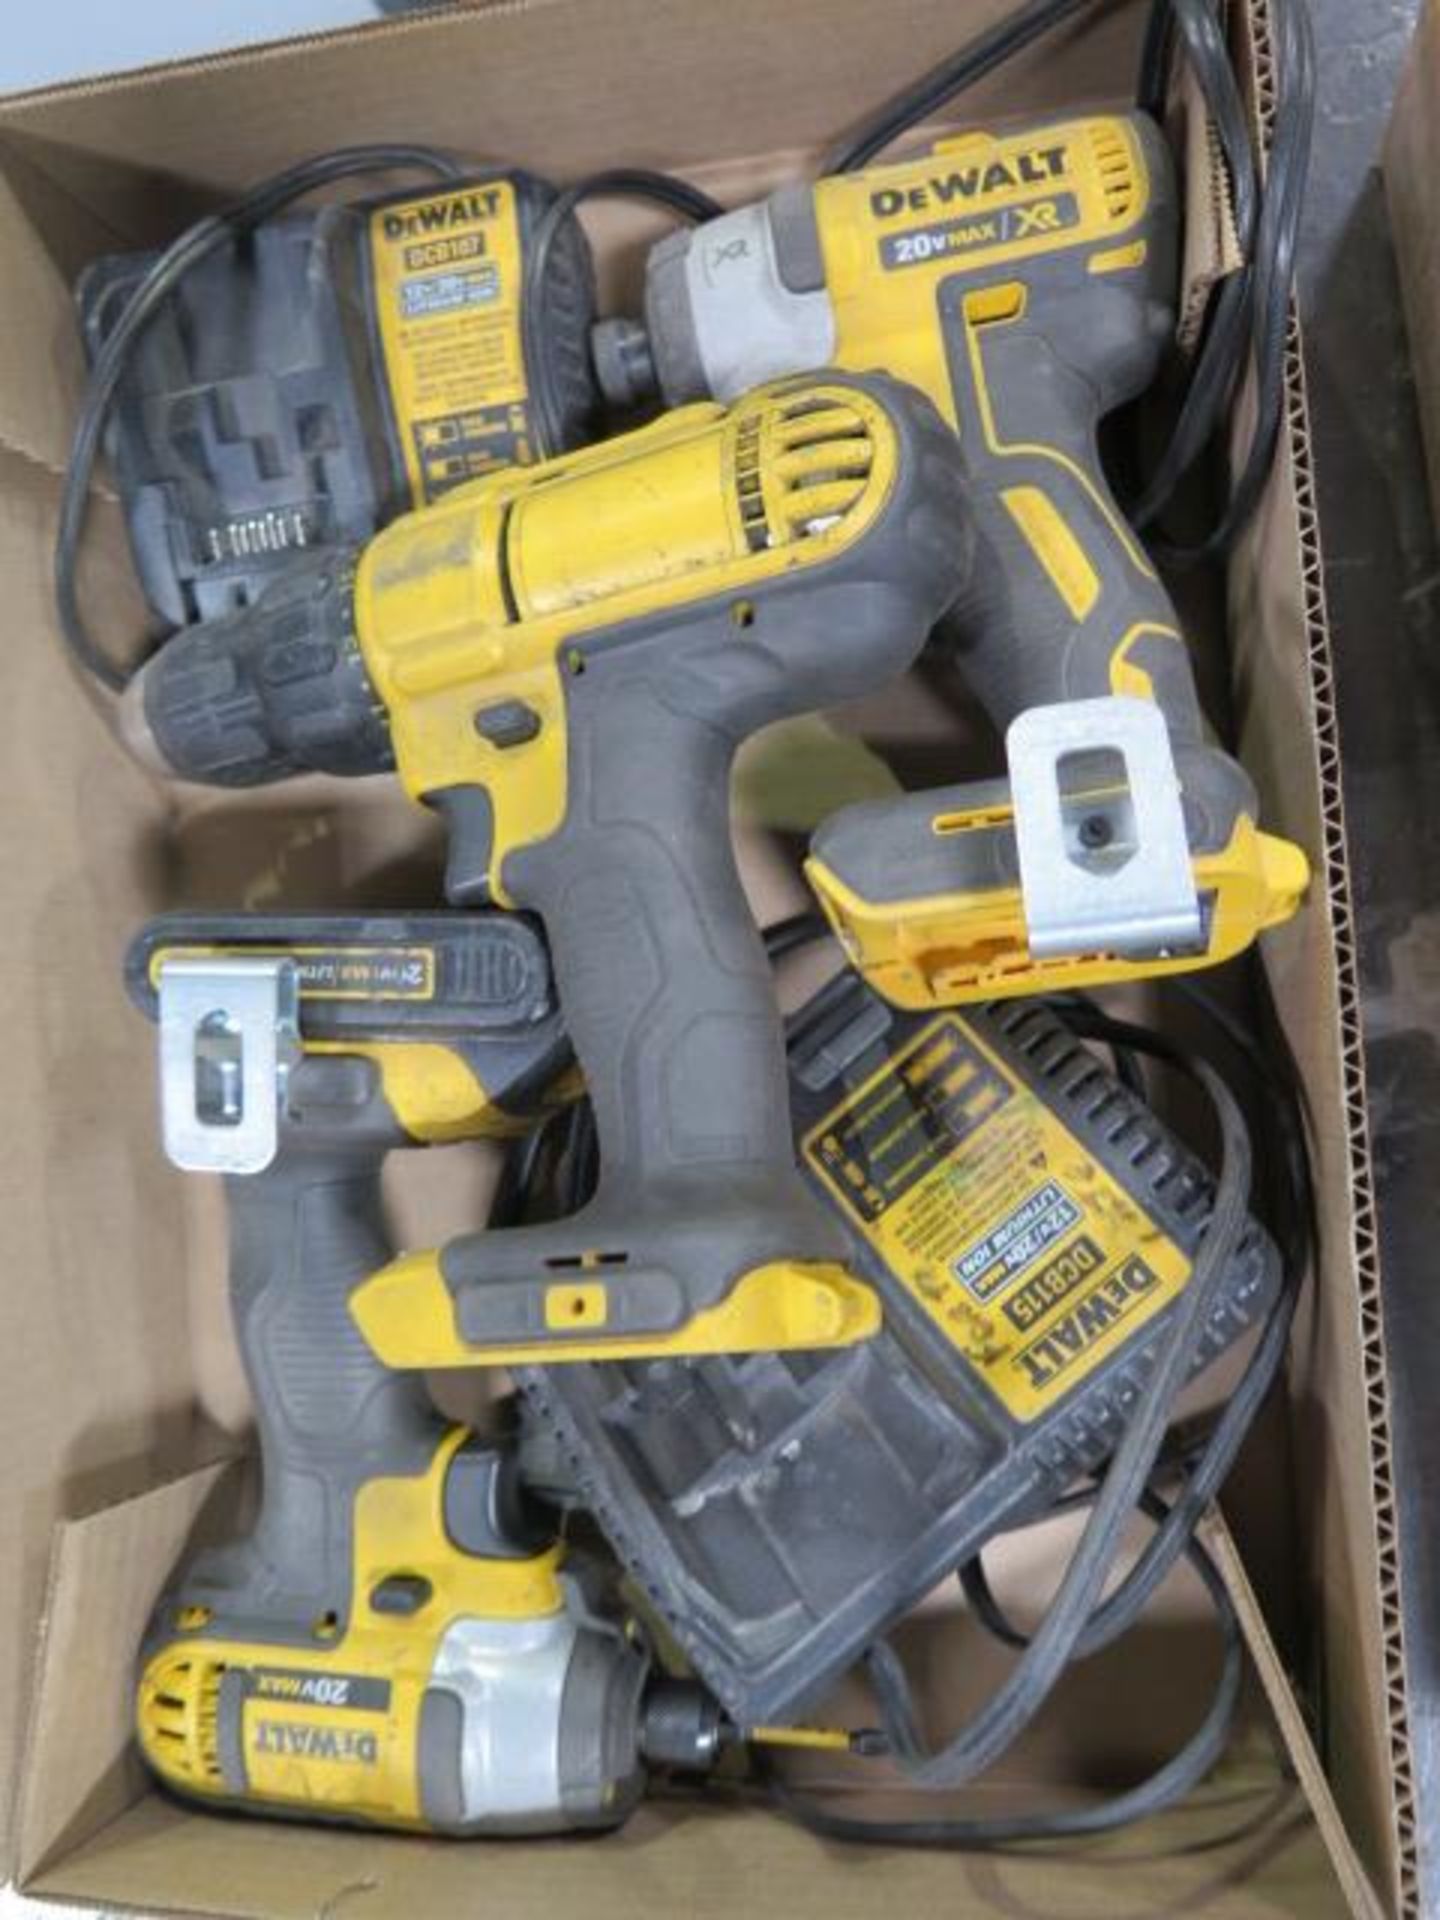 DeWalt 20 Volt Cordless Drills and Nut Drivers w/ Charger (SOLD AS-IS - NO WARRANTY) - Image 2 of 6